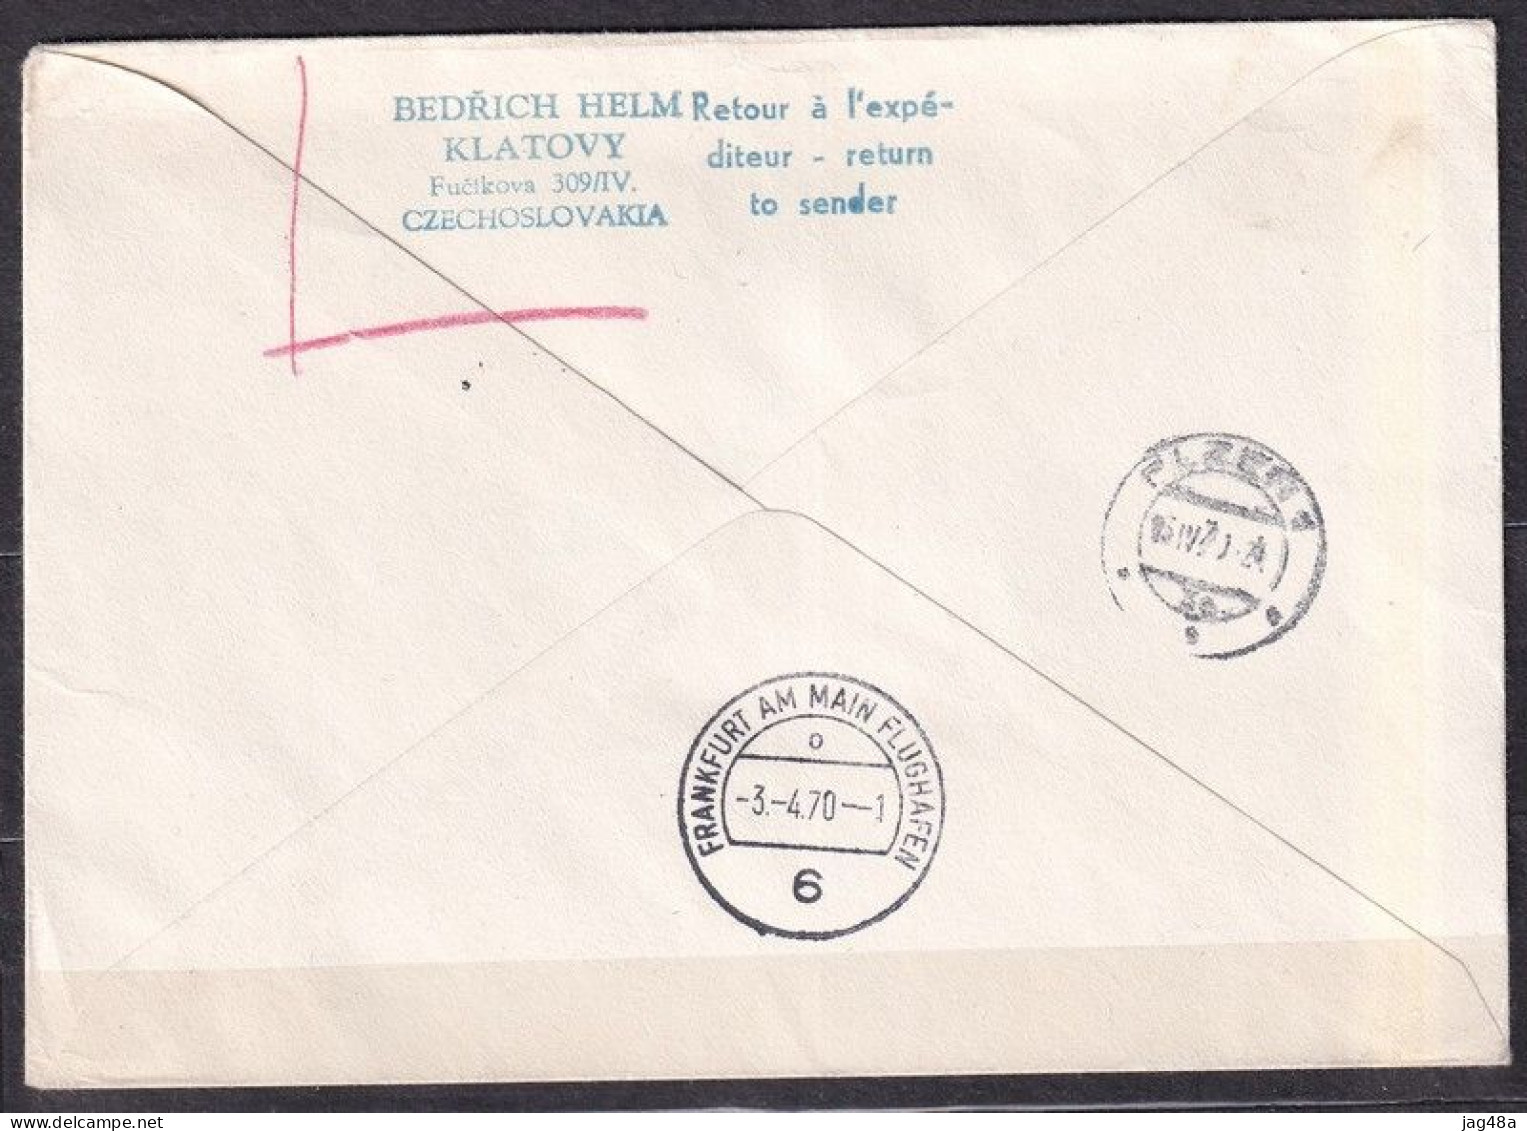 BULGARIA.1970/Sofia, 70 Years Of Connections Sofia Frankfurt A/M. Special Flight  LH199/per Luftpost. - Covers & Documents